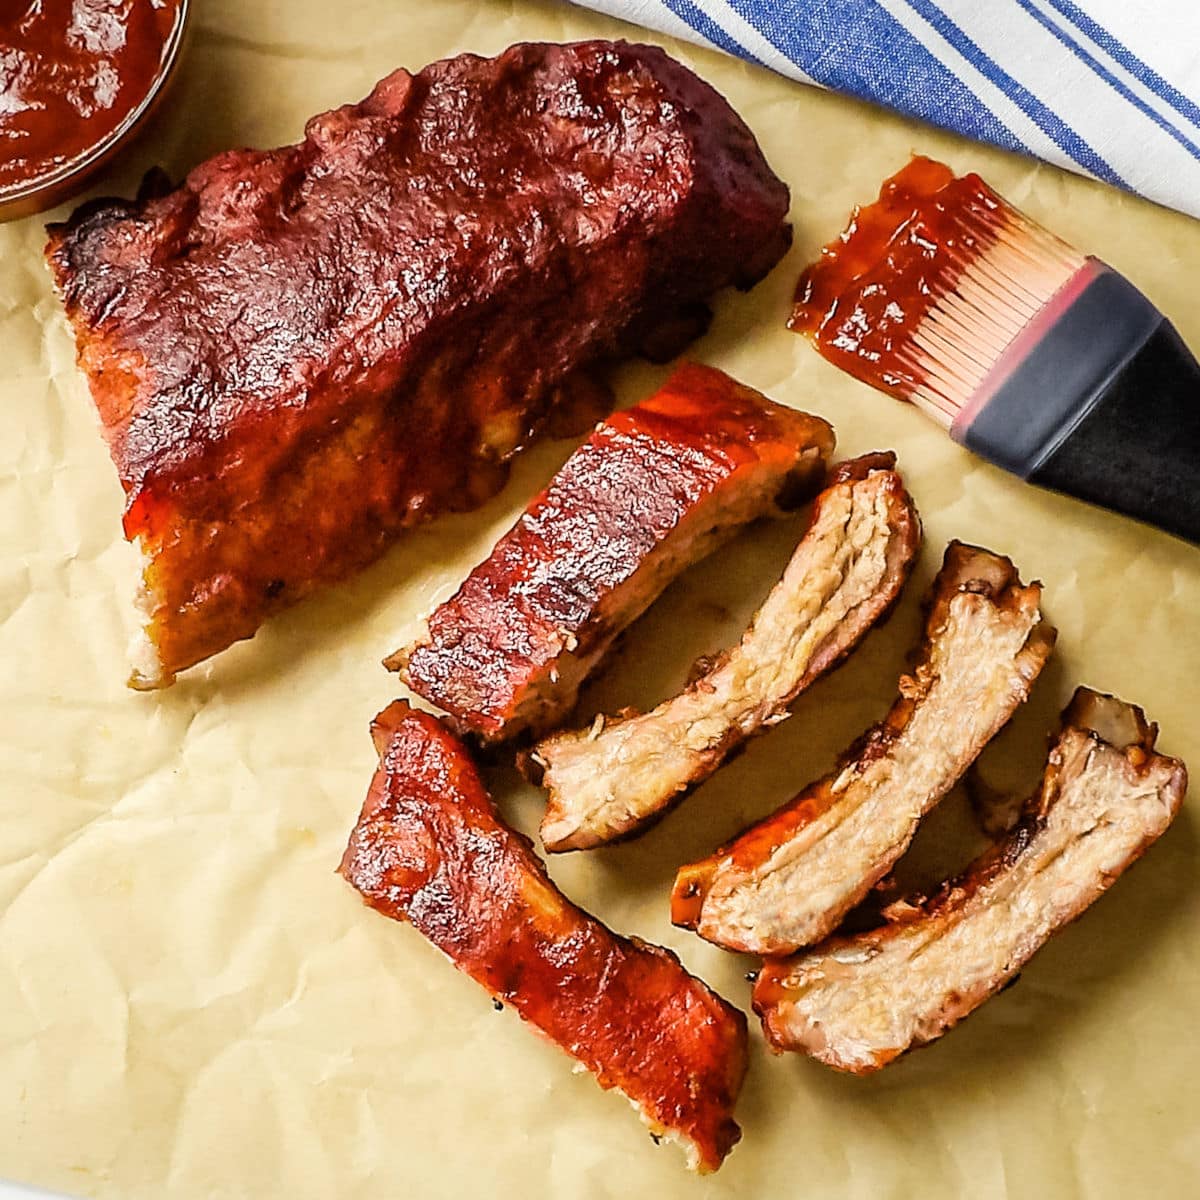 Sliced baby back ribs on a piece of parchment paper.